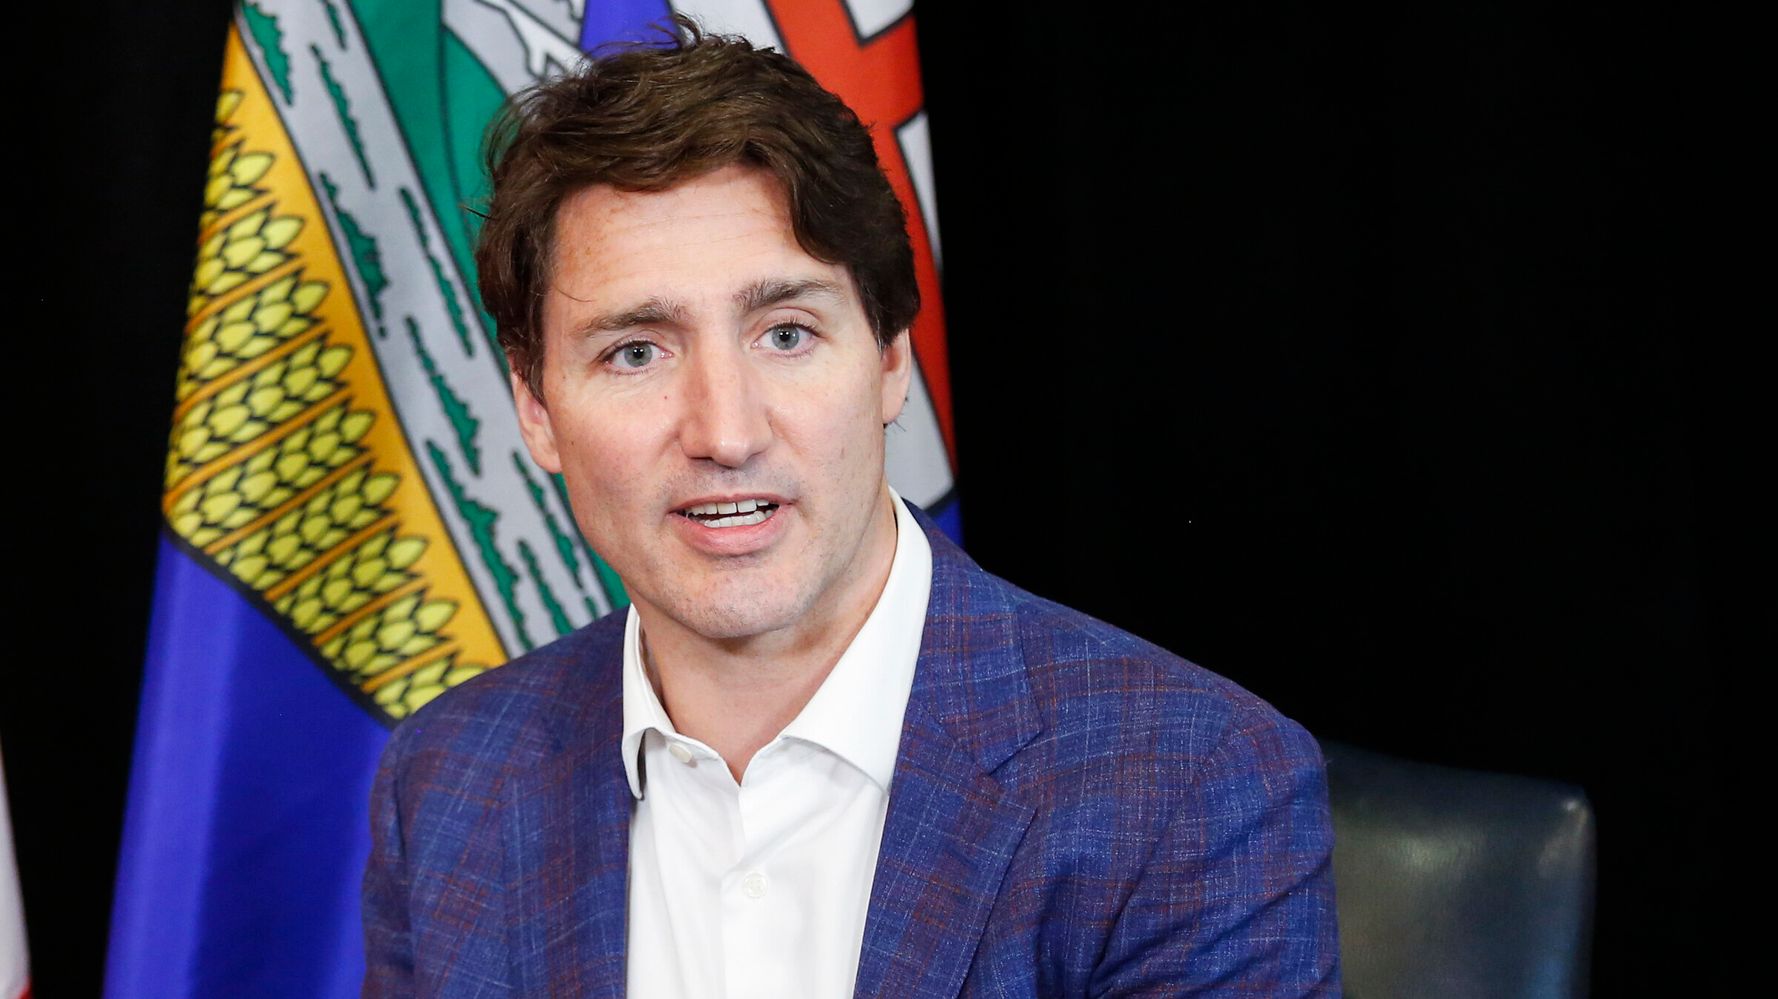 Canada May Reopen Borders To Vaccinated Americans In August, PM Justin Trudeau Says